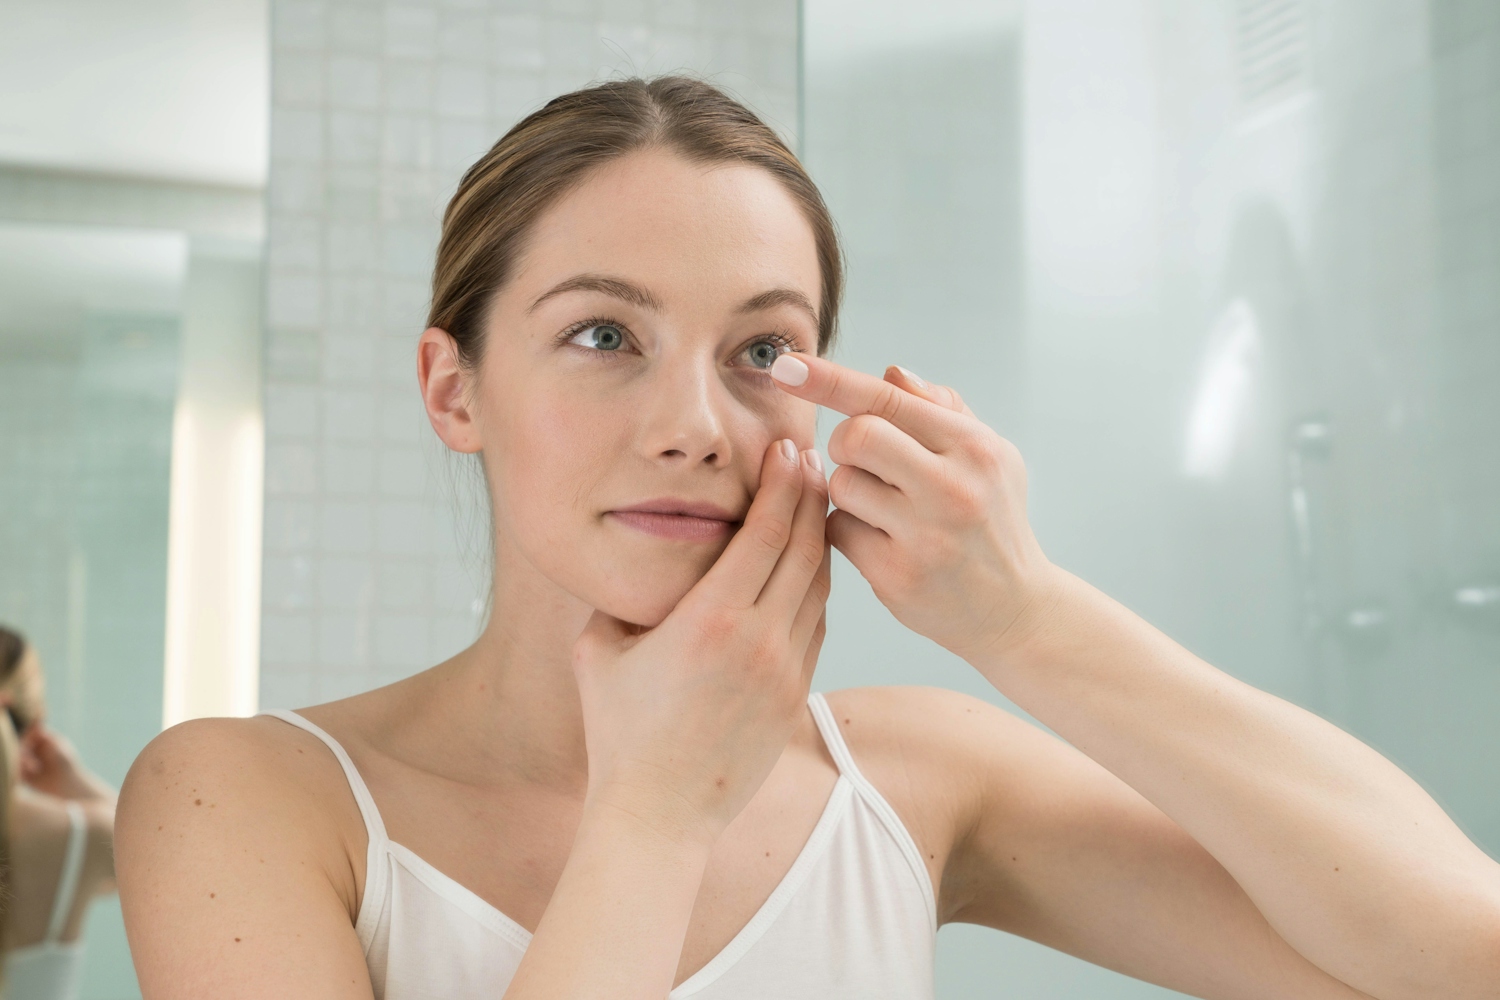 Woman Holding contact lens to eye looking in mirror